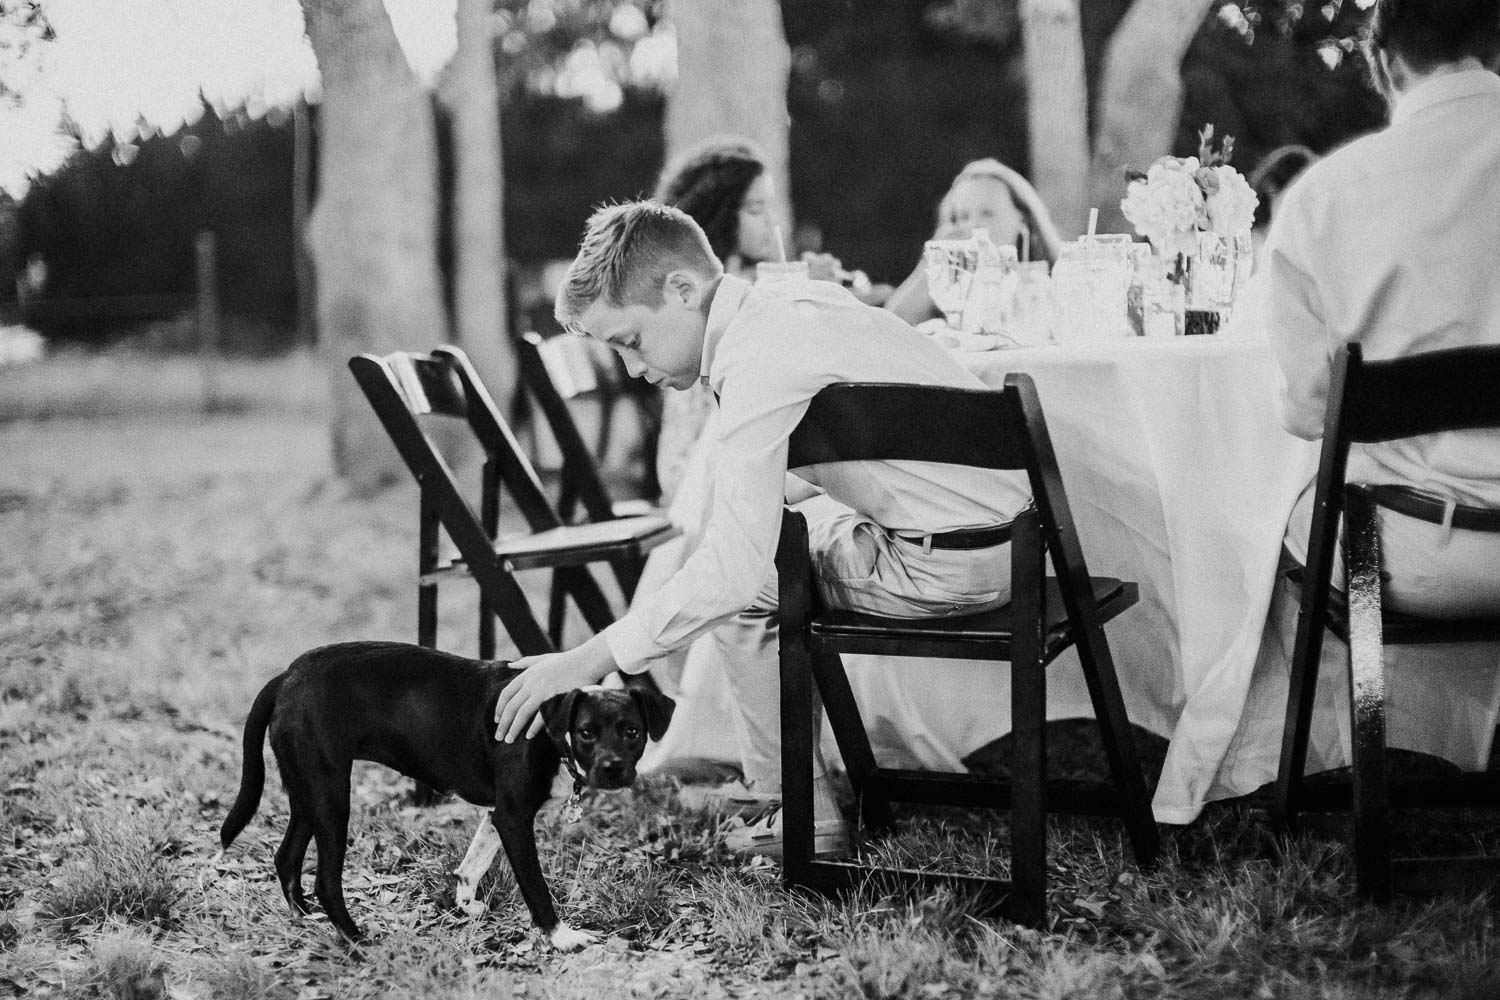 During the wedding reception, a little boy greets the owners dogs